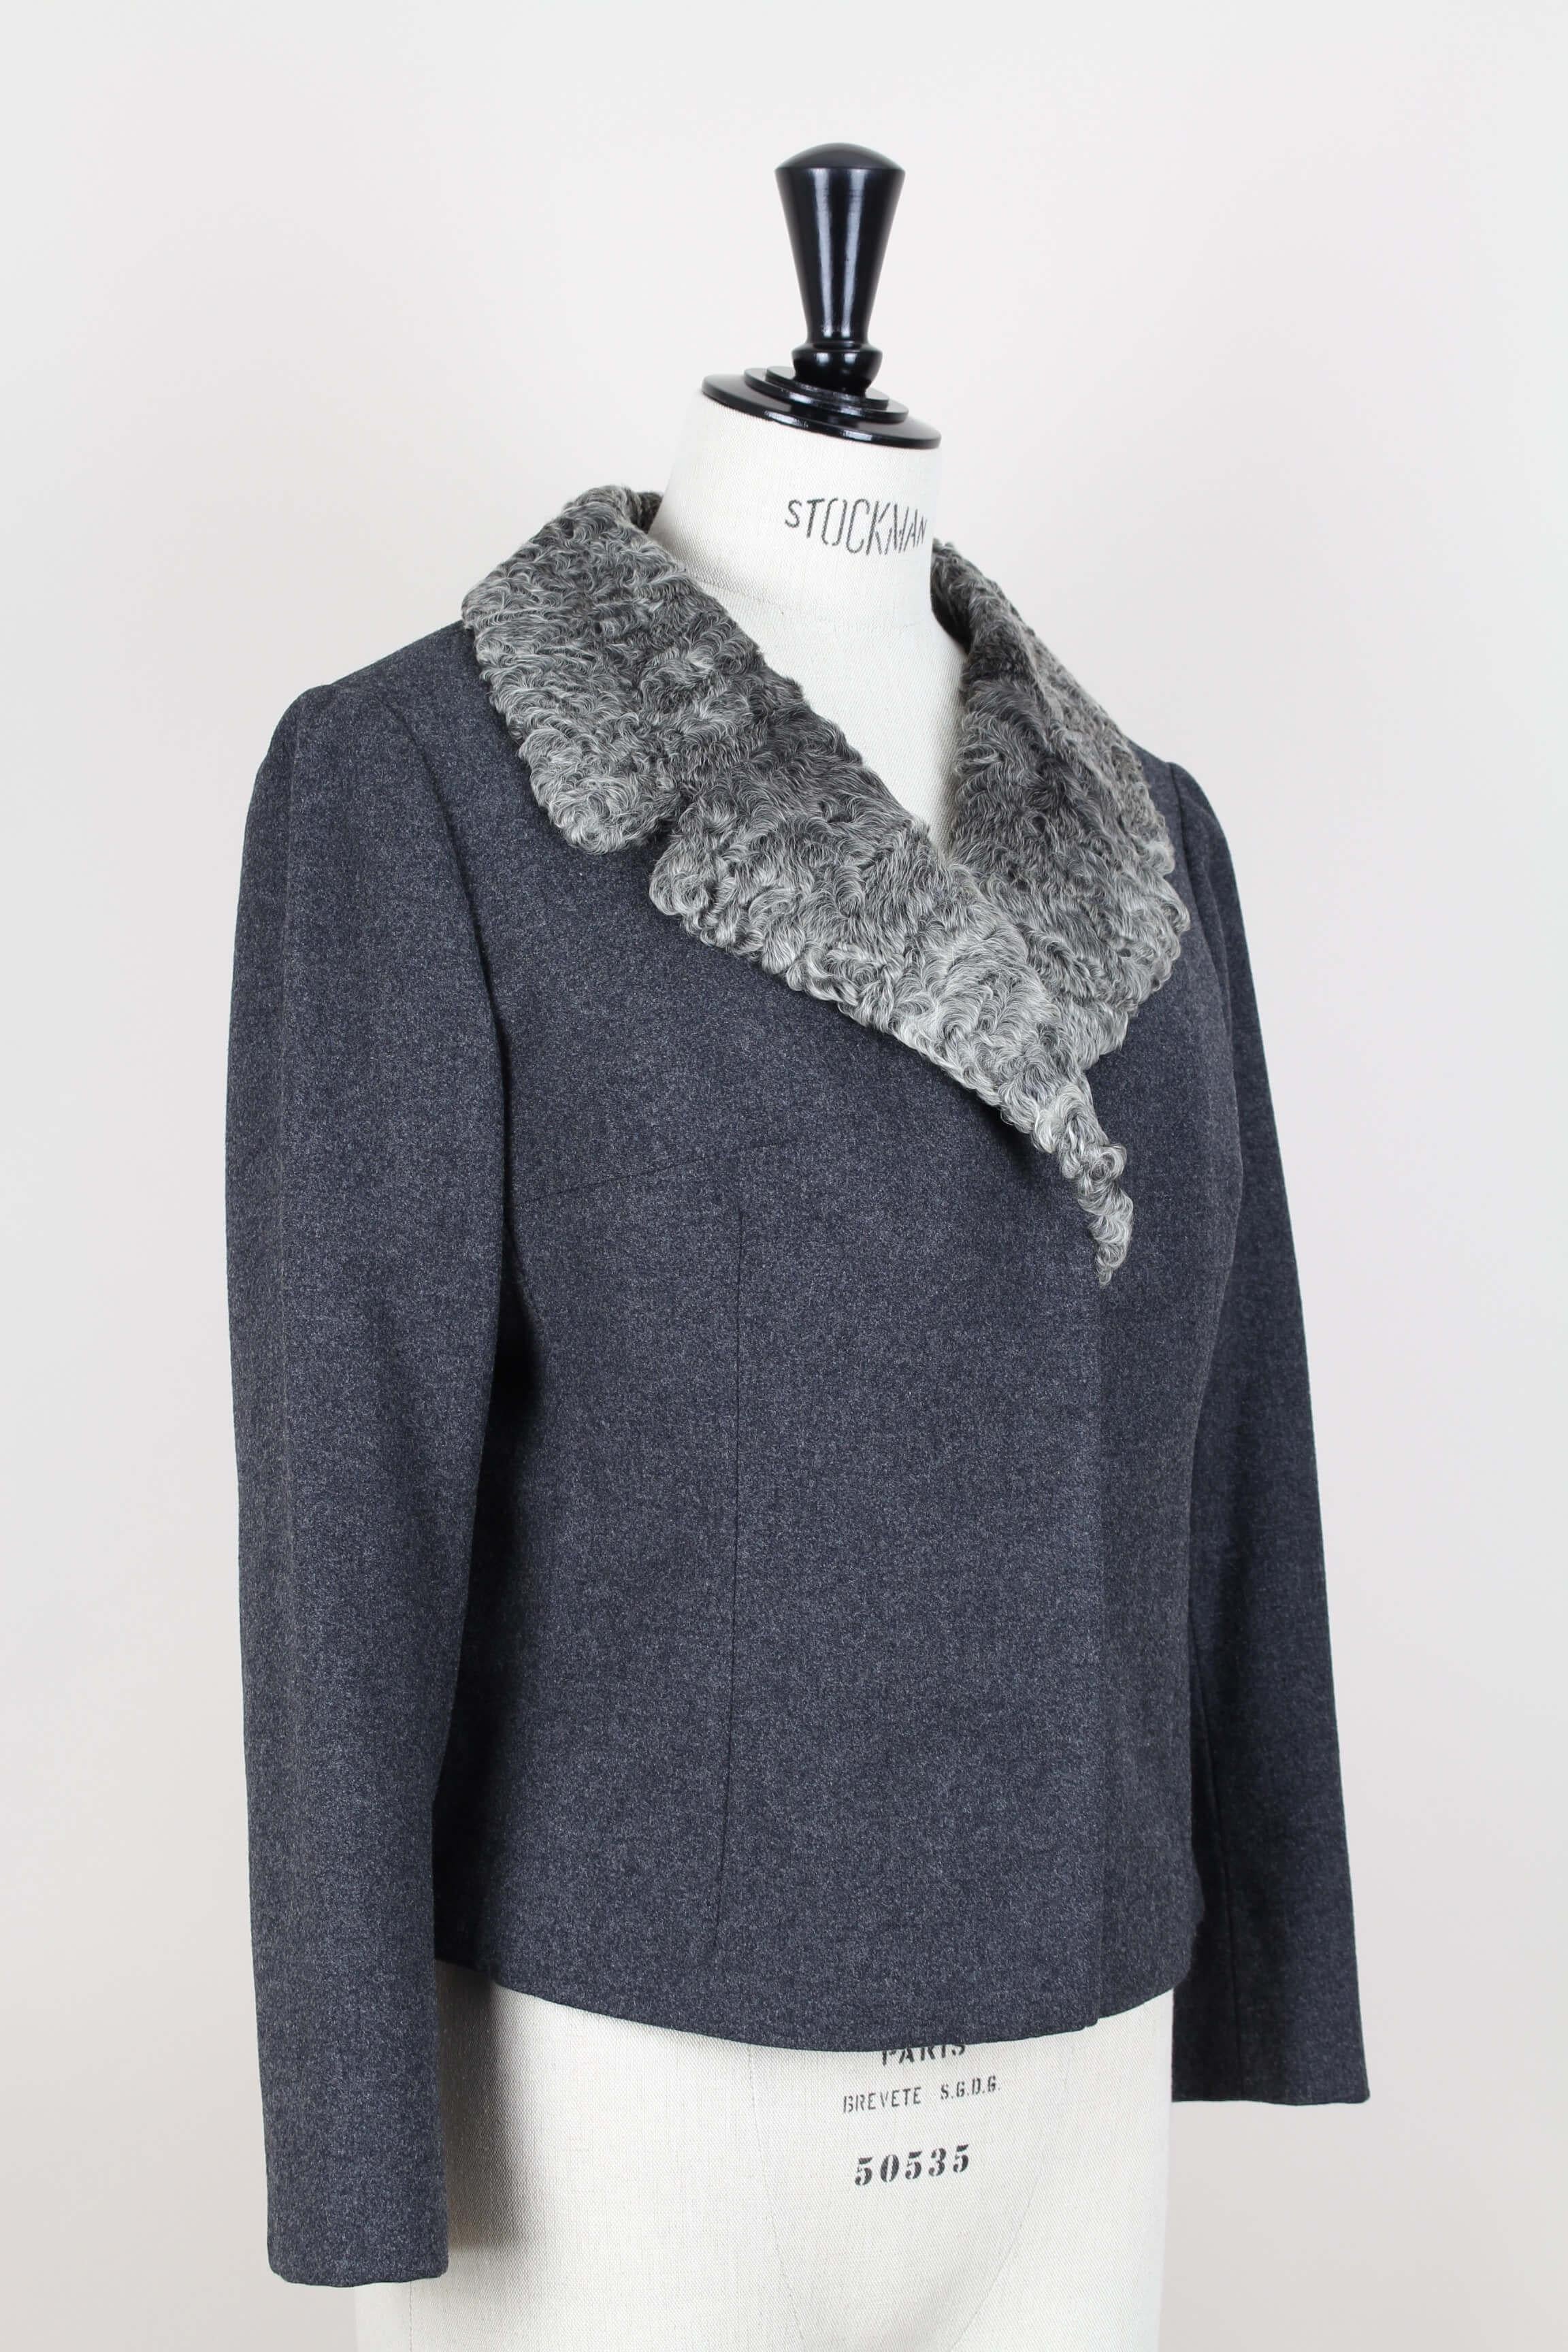 Chic and rare Christian Dior little box cut jacket with a lush Persian lamb fur collar, most likely from the early 1960s.

The silhouette is very minimum in design, with the emphasis on the luxe silky-soft Persian lamb fur collar in various shades